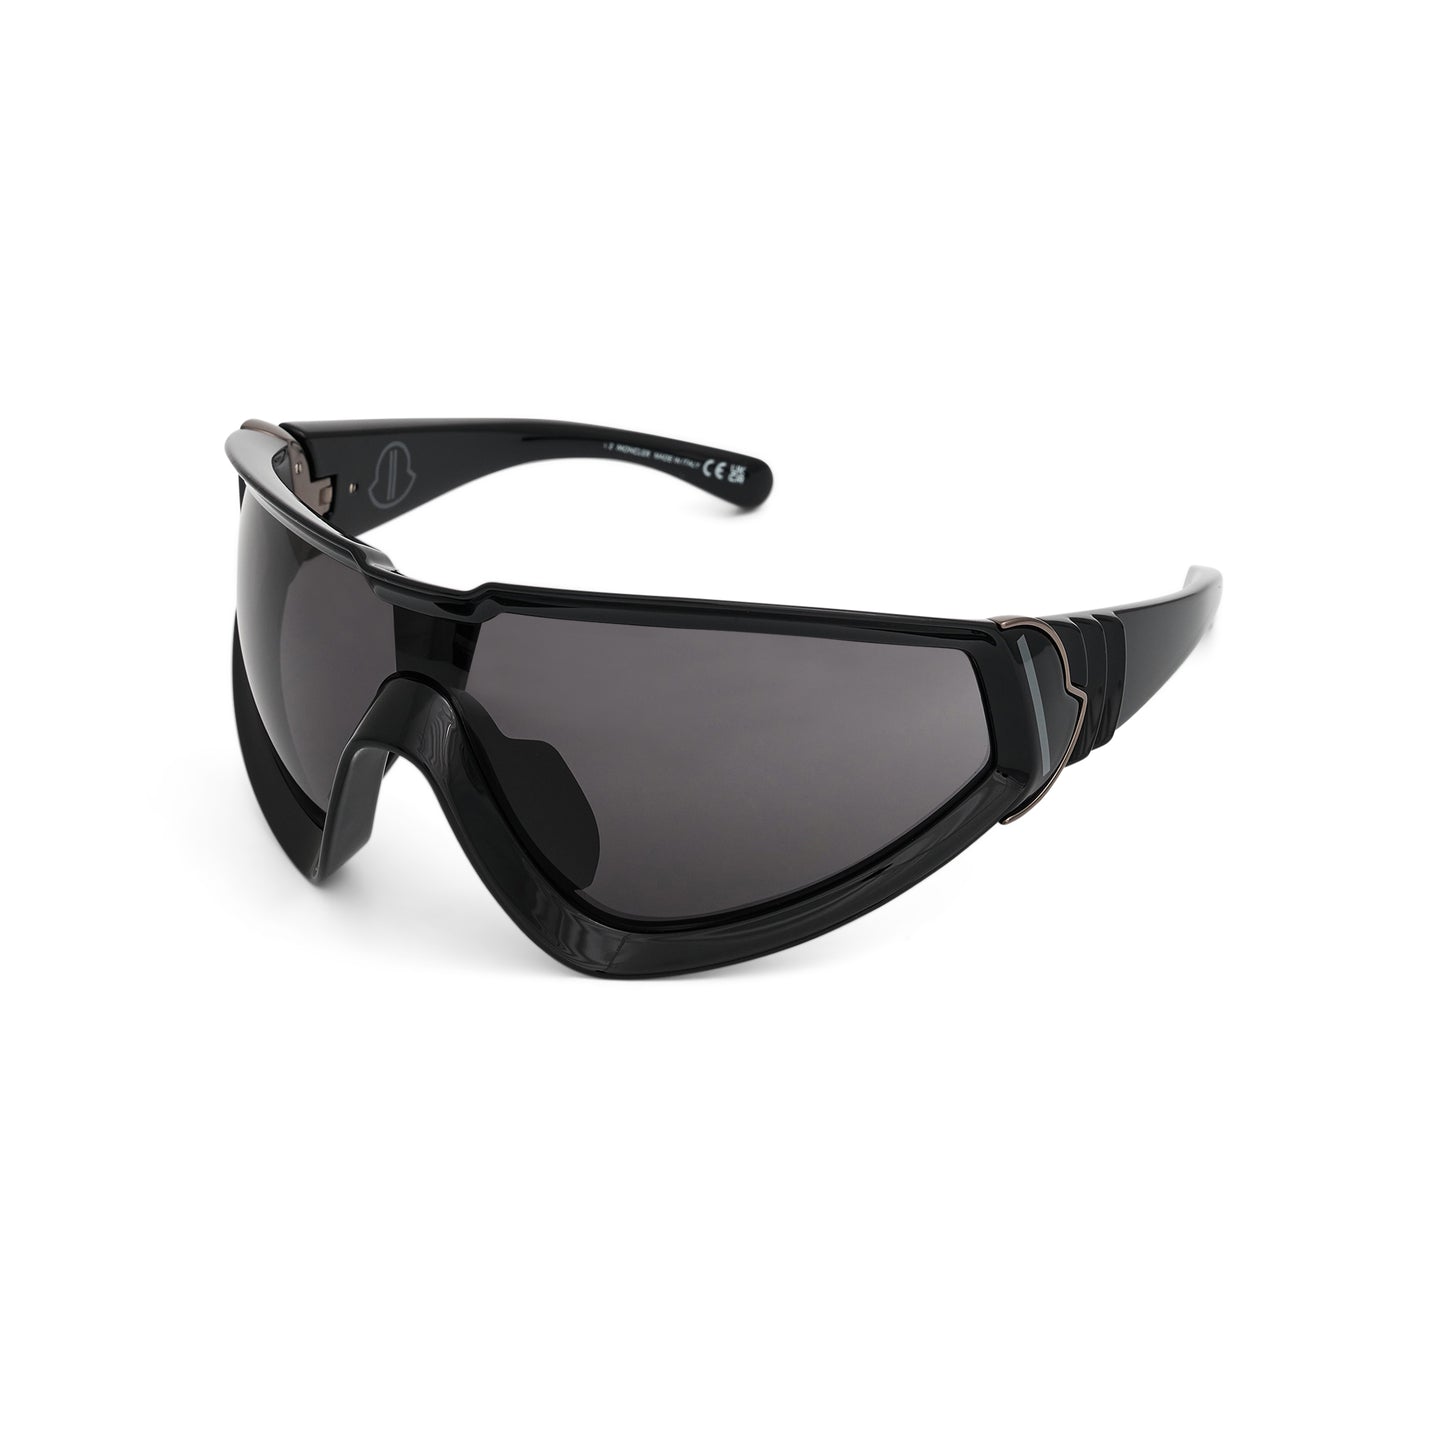 Moncler x Rick Owens Wrapid Sunglasses in Black